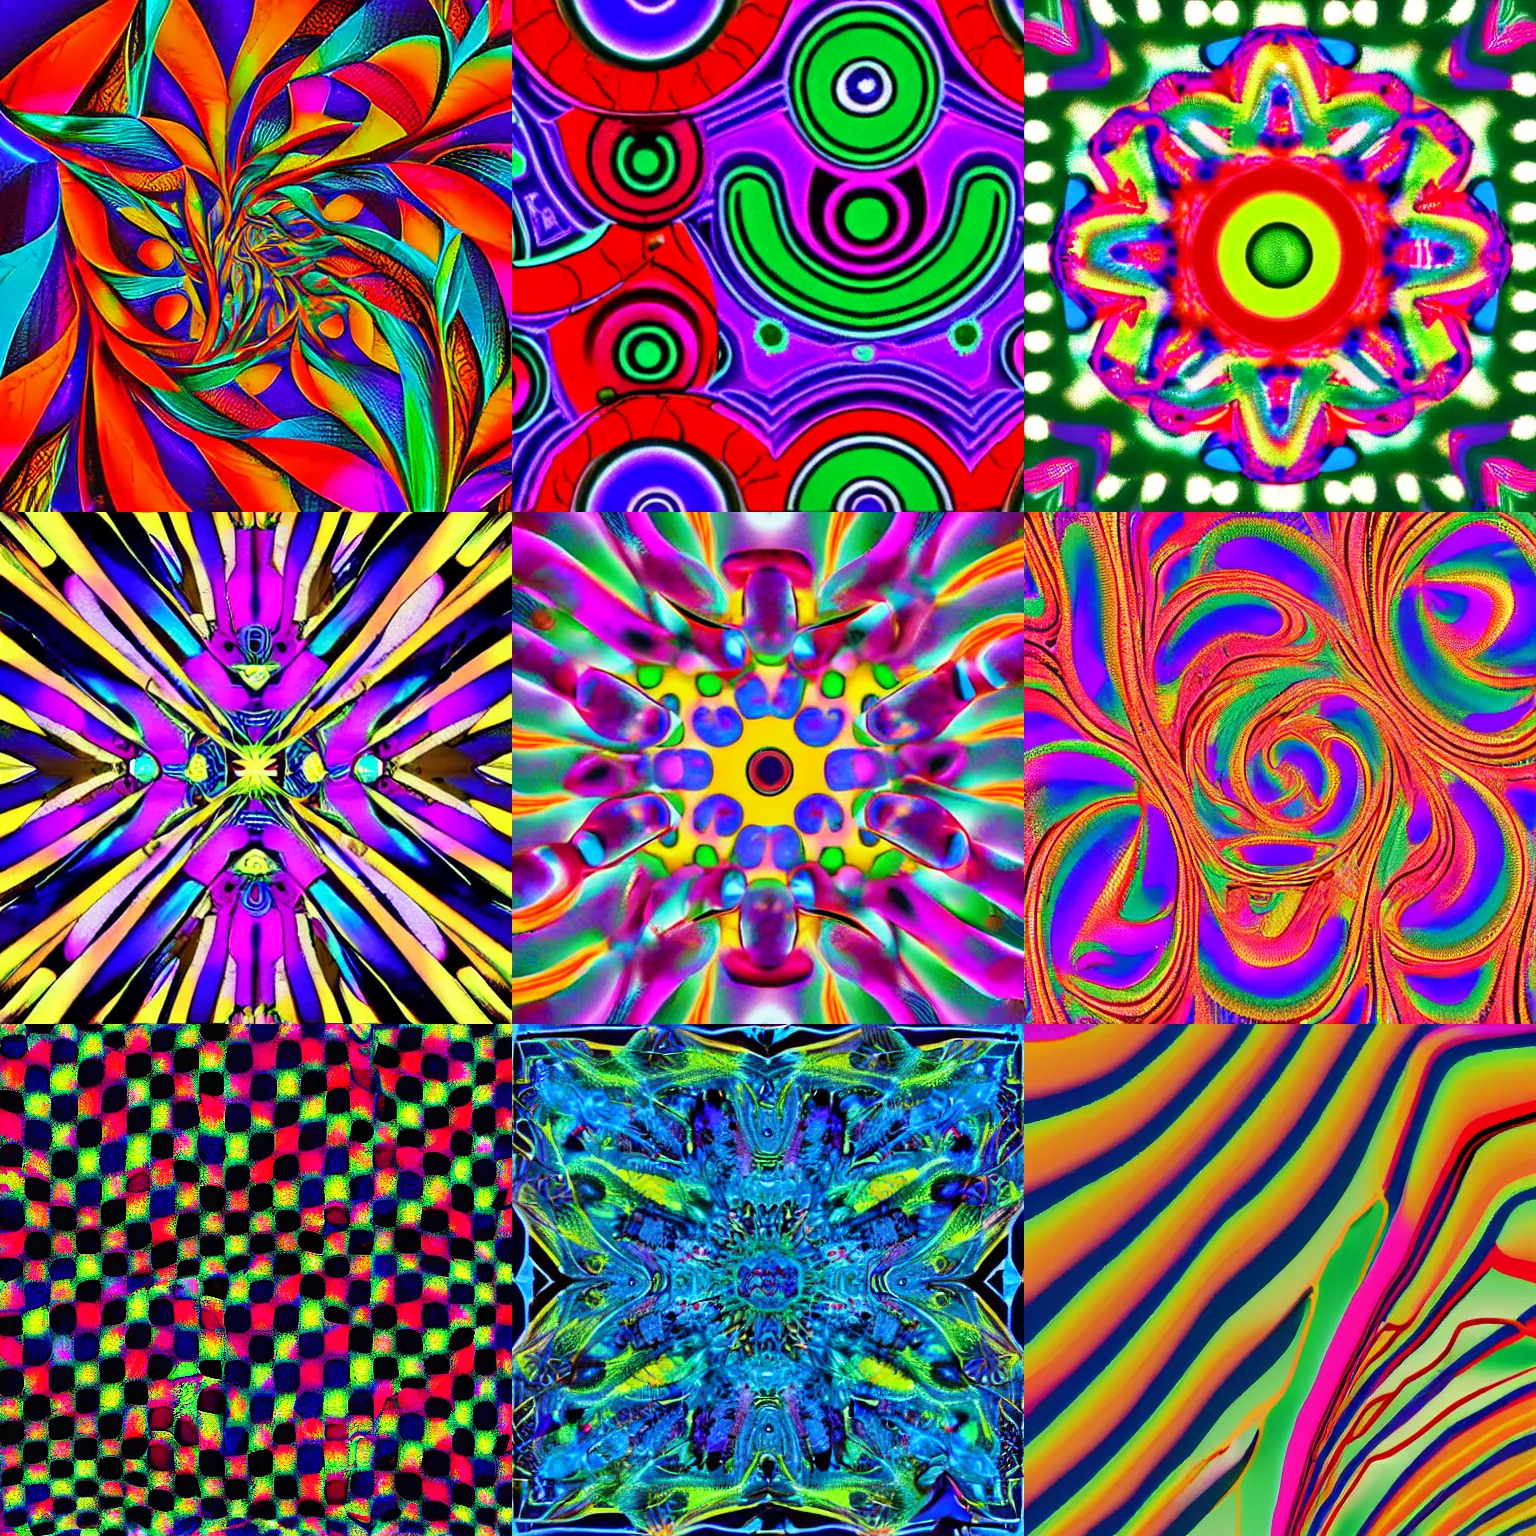 Prompt: productivity inducing hallucinogenic image, anyone that looks at this image gains instant focus and stops procrastinating, series of patterns, shapes and colors that induce a drug like state of love for work, for focus and lack of distractions